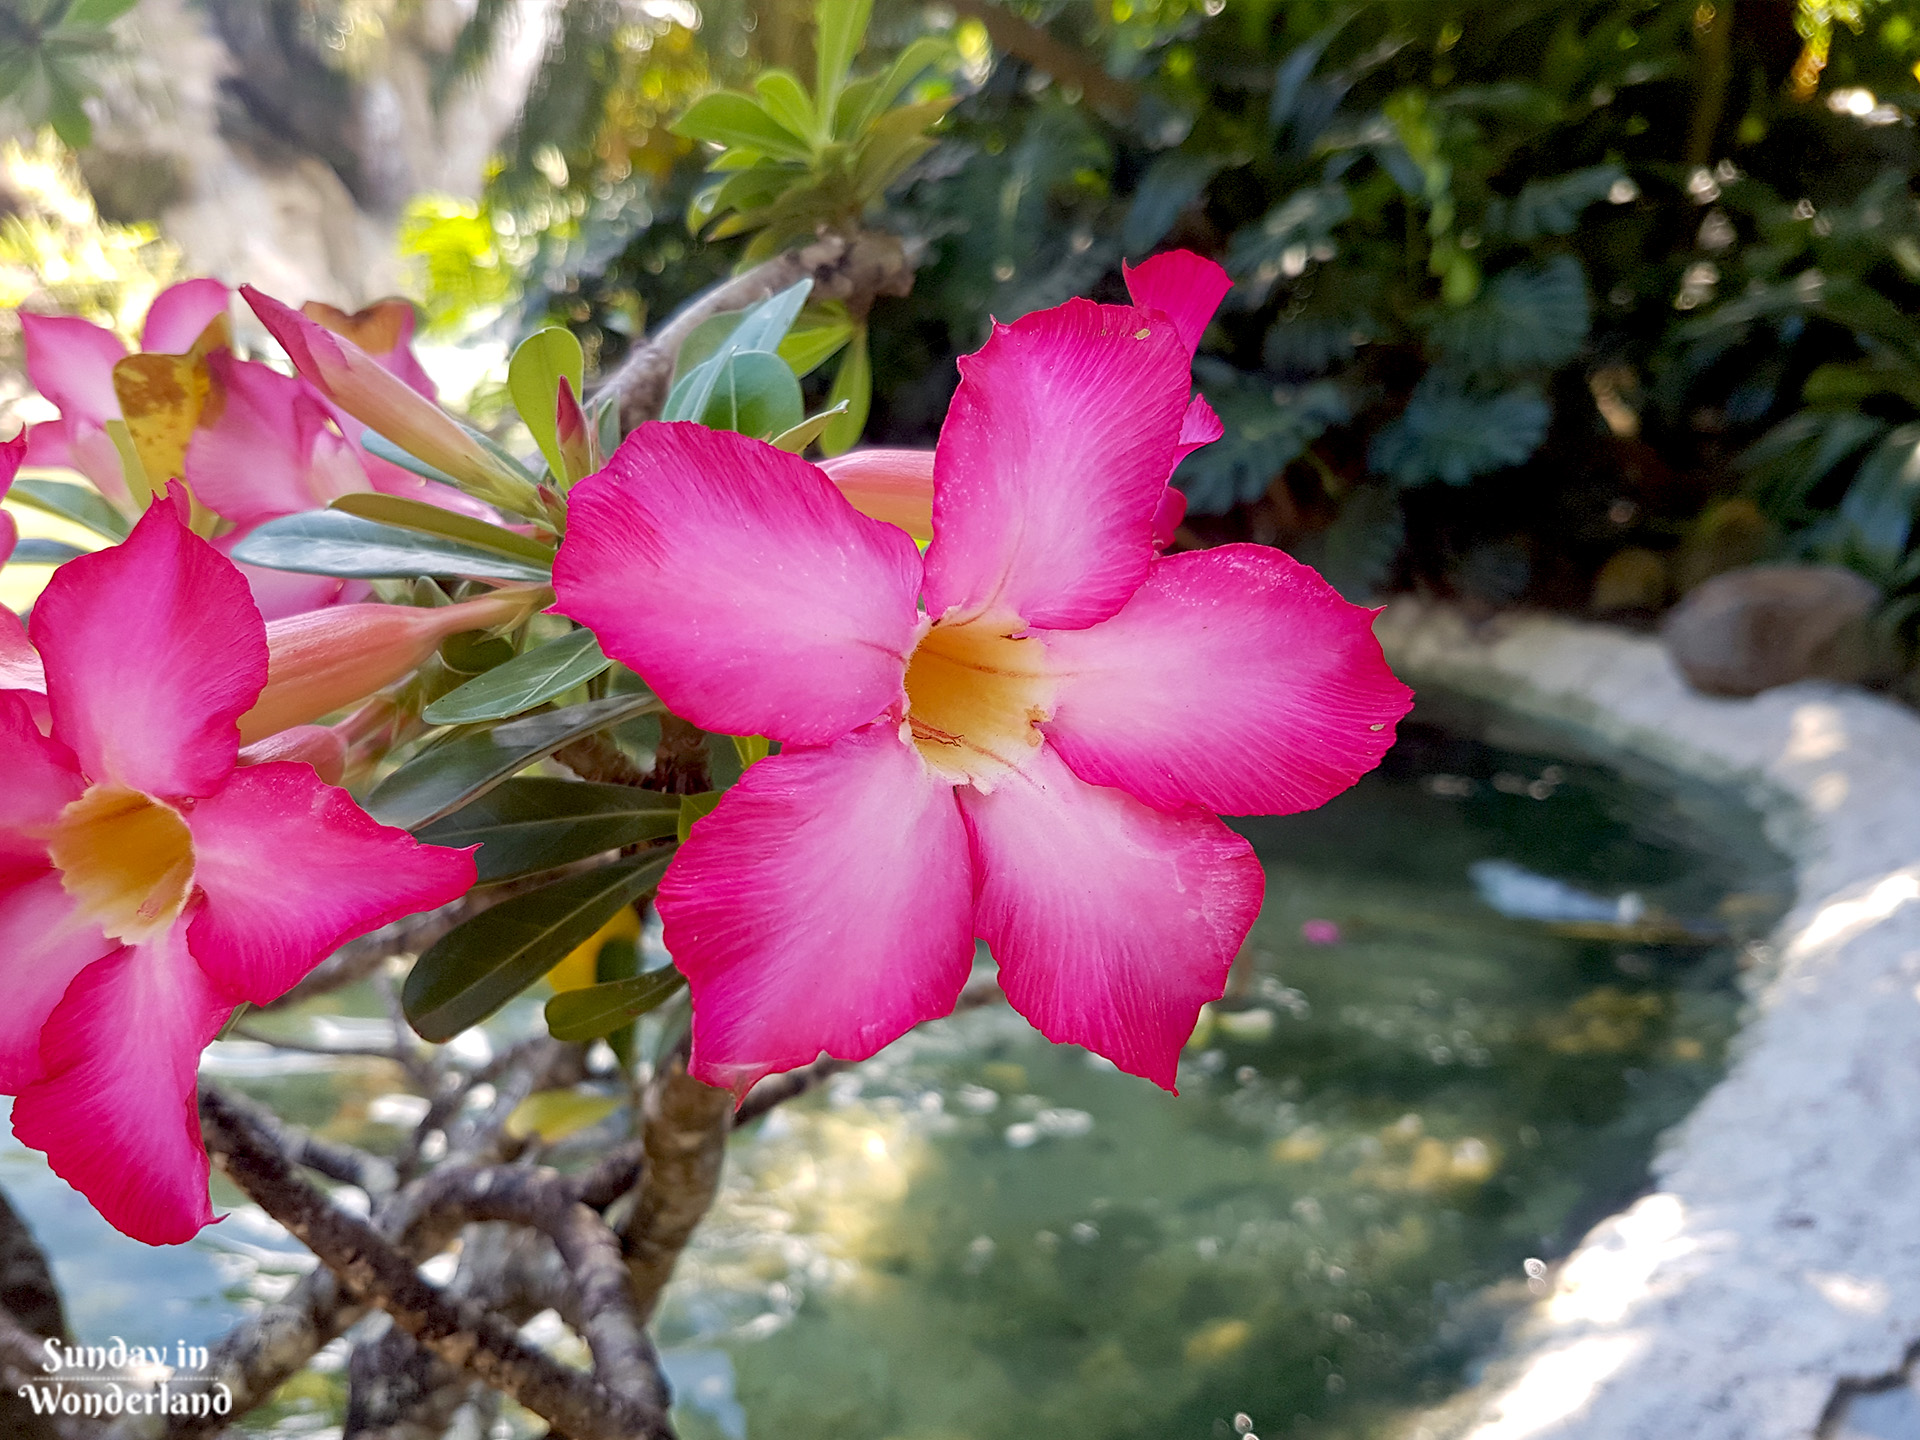 A pink hibiscus in Botanical Garden in Deshaies in Guadeloupe - Sunday in Wonderland Blog